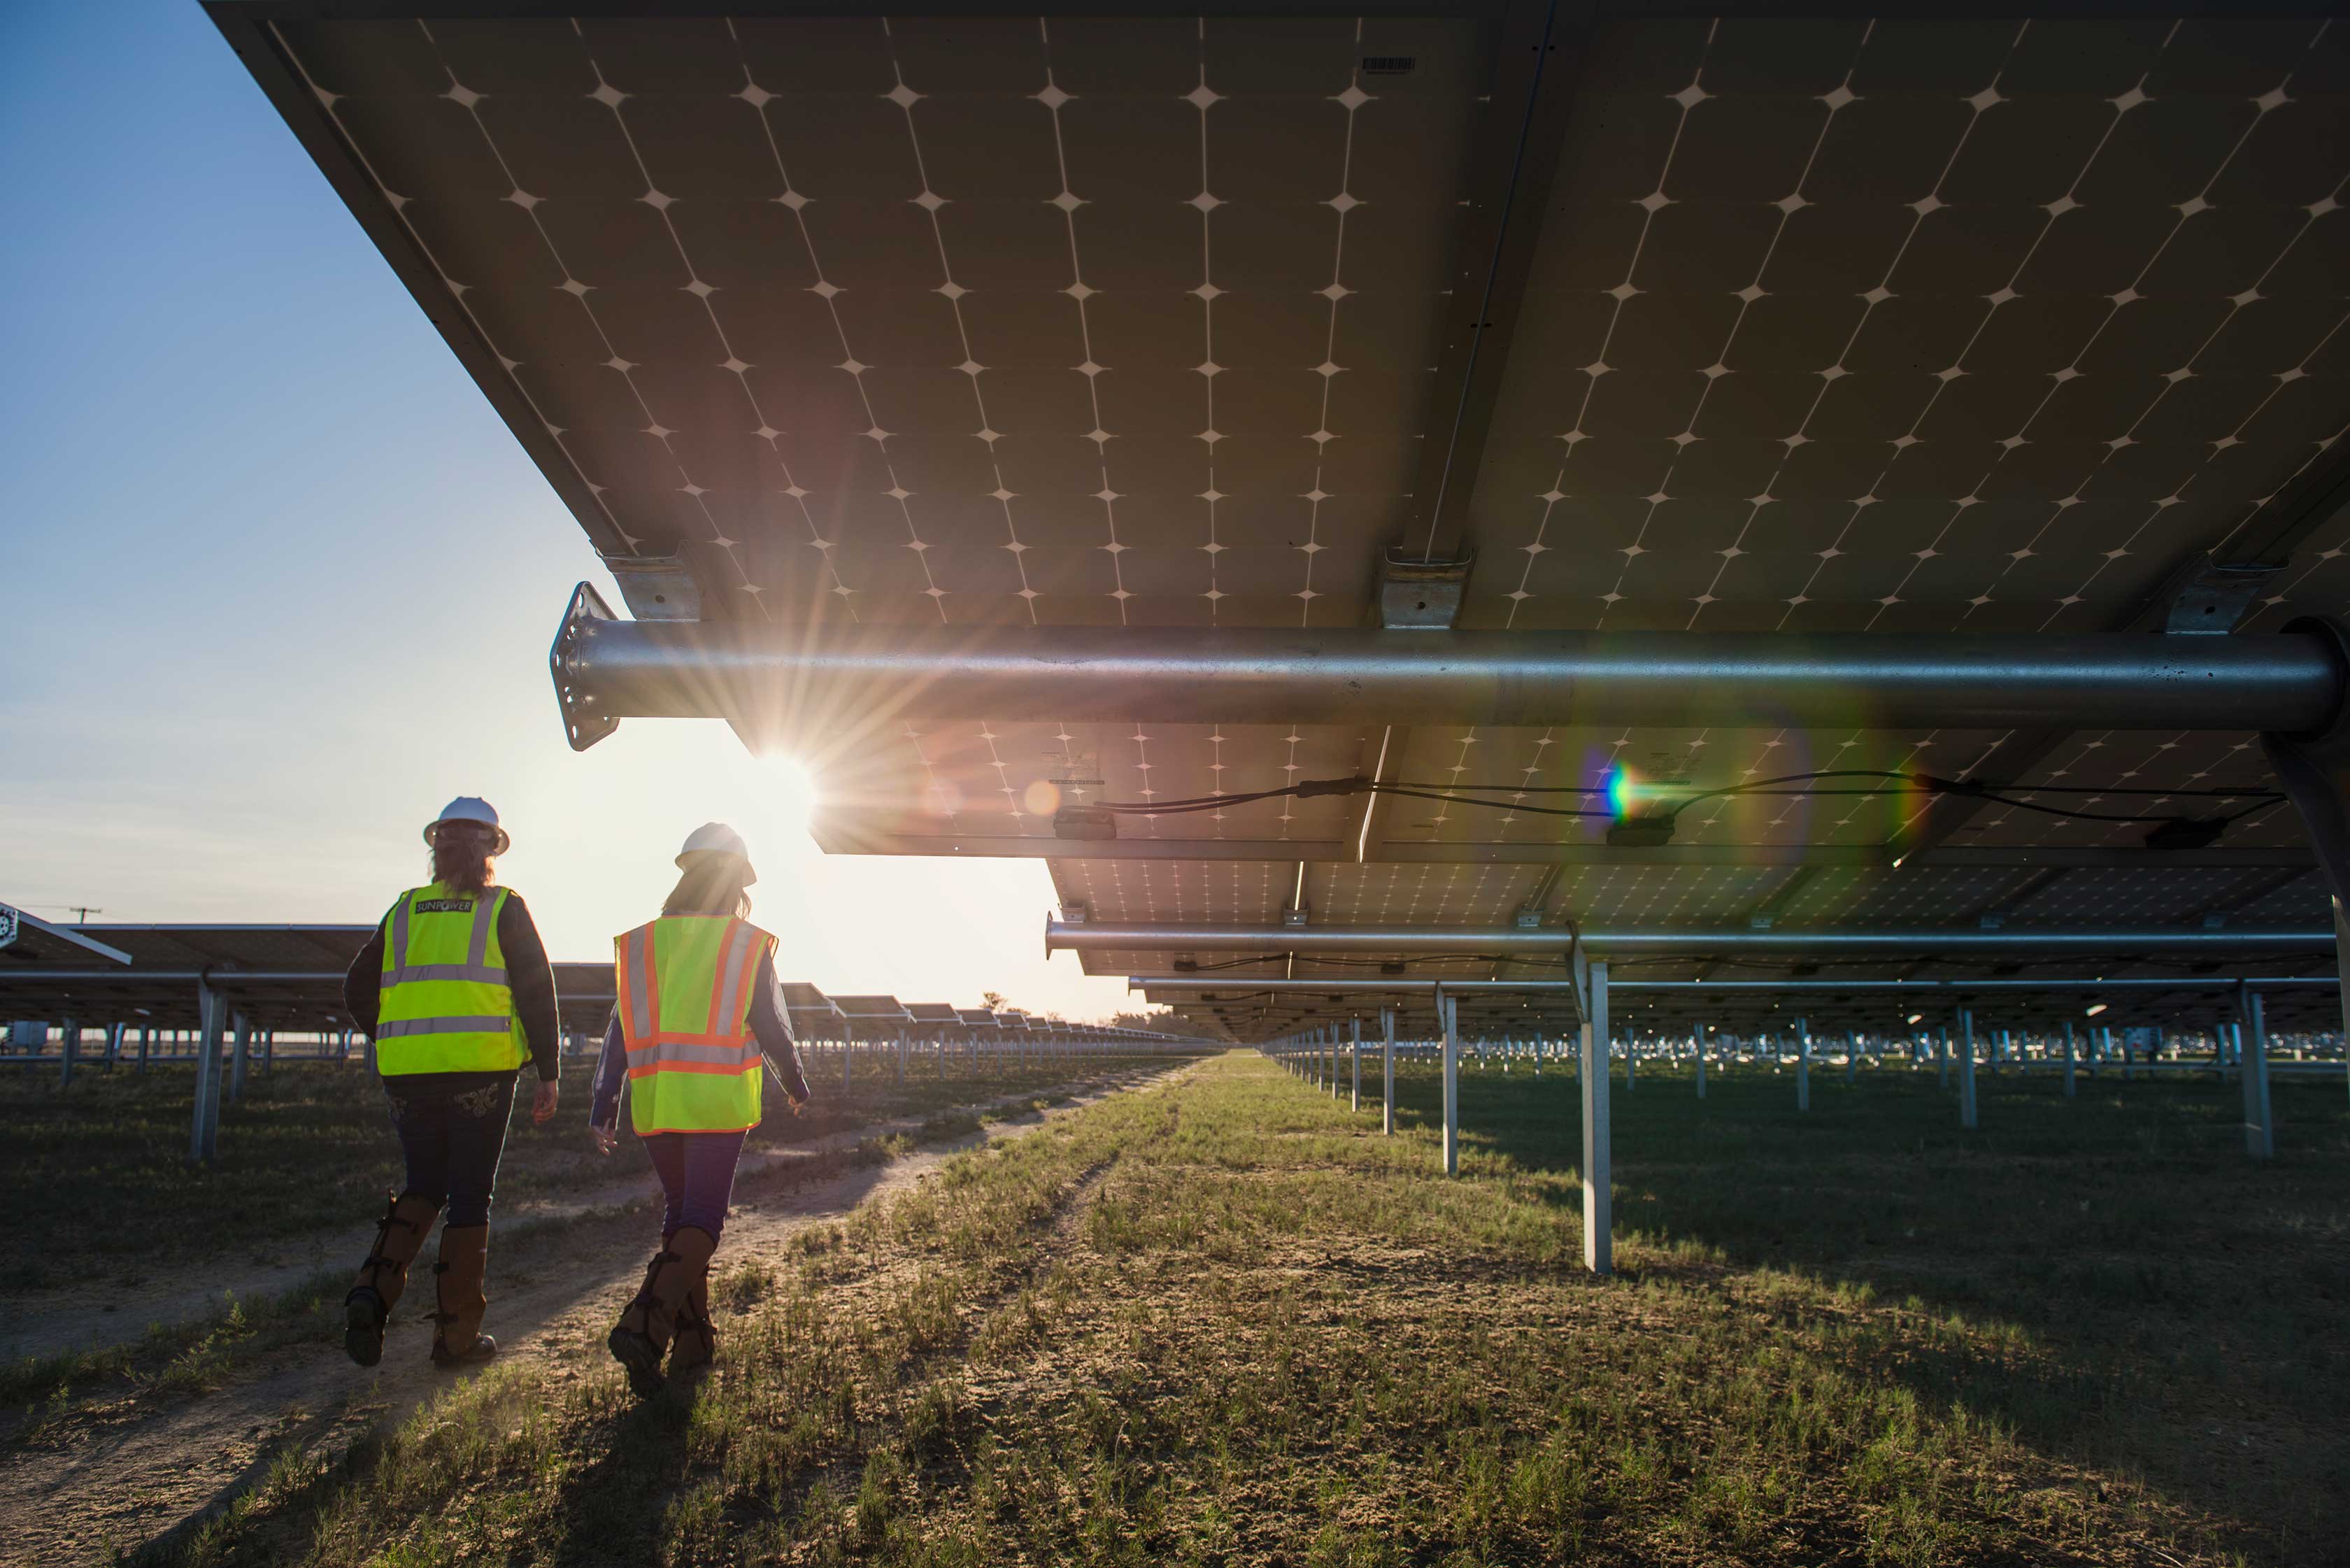 Two workers walk along rows of solar panels.